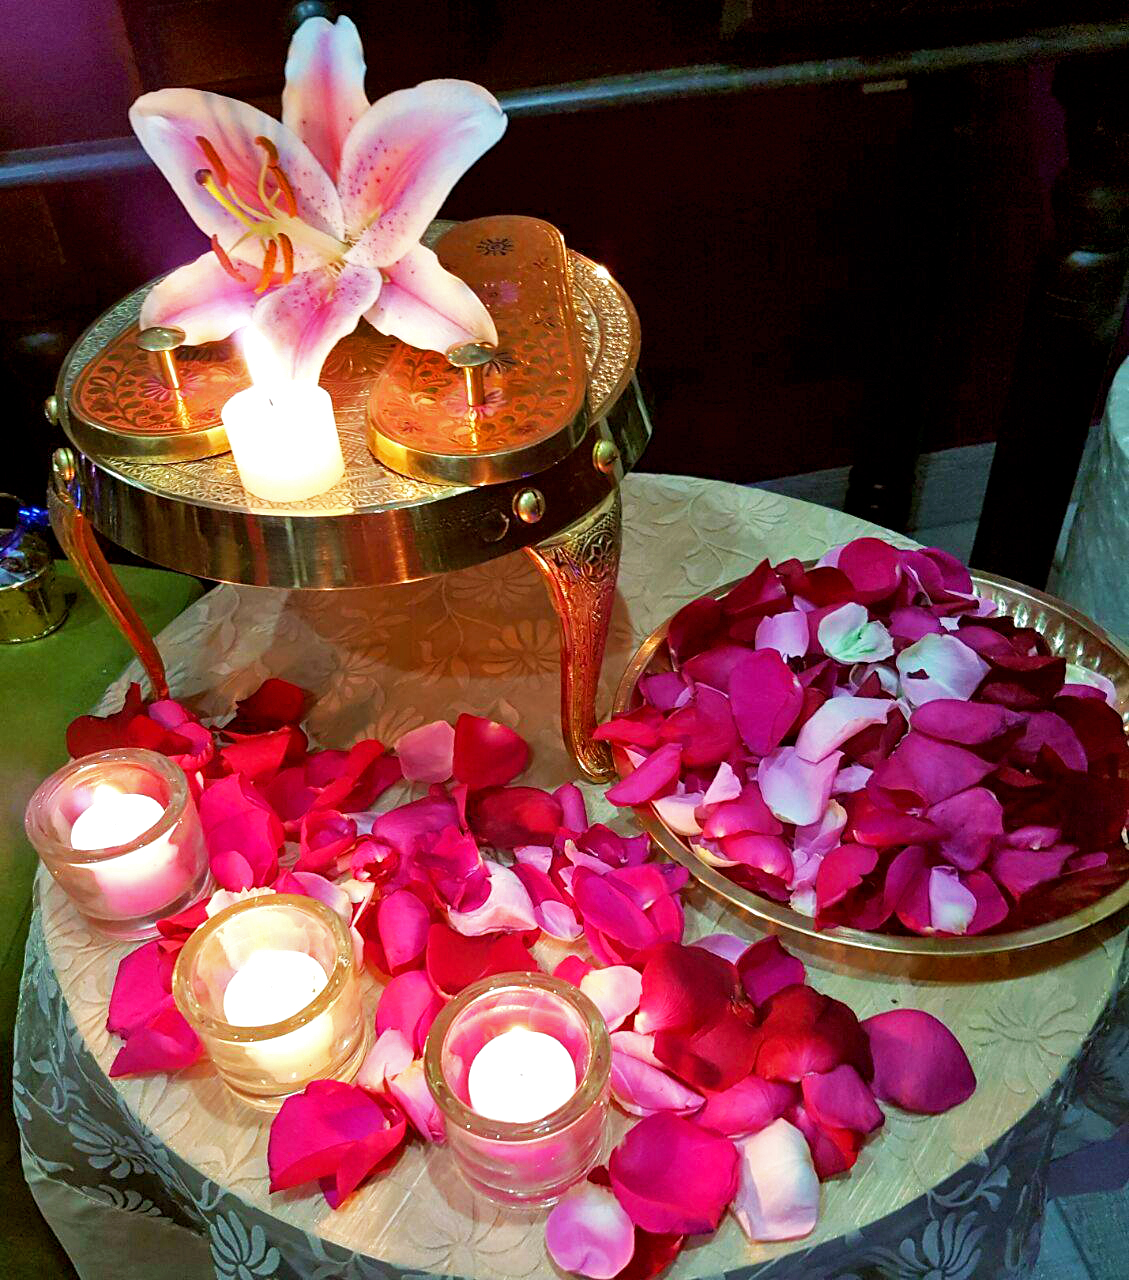 Rose petals offered to Babas Padukas at the Centurion Center